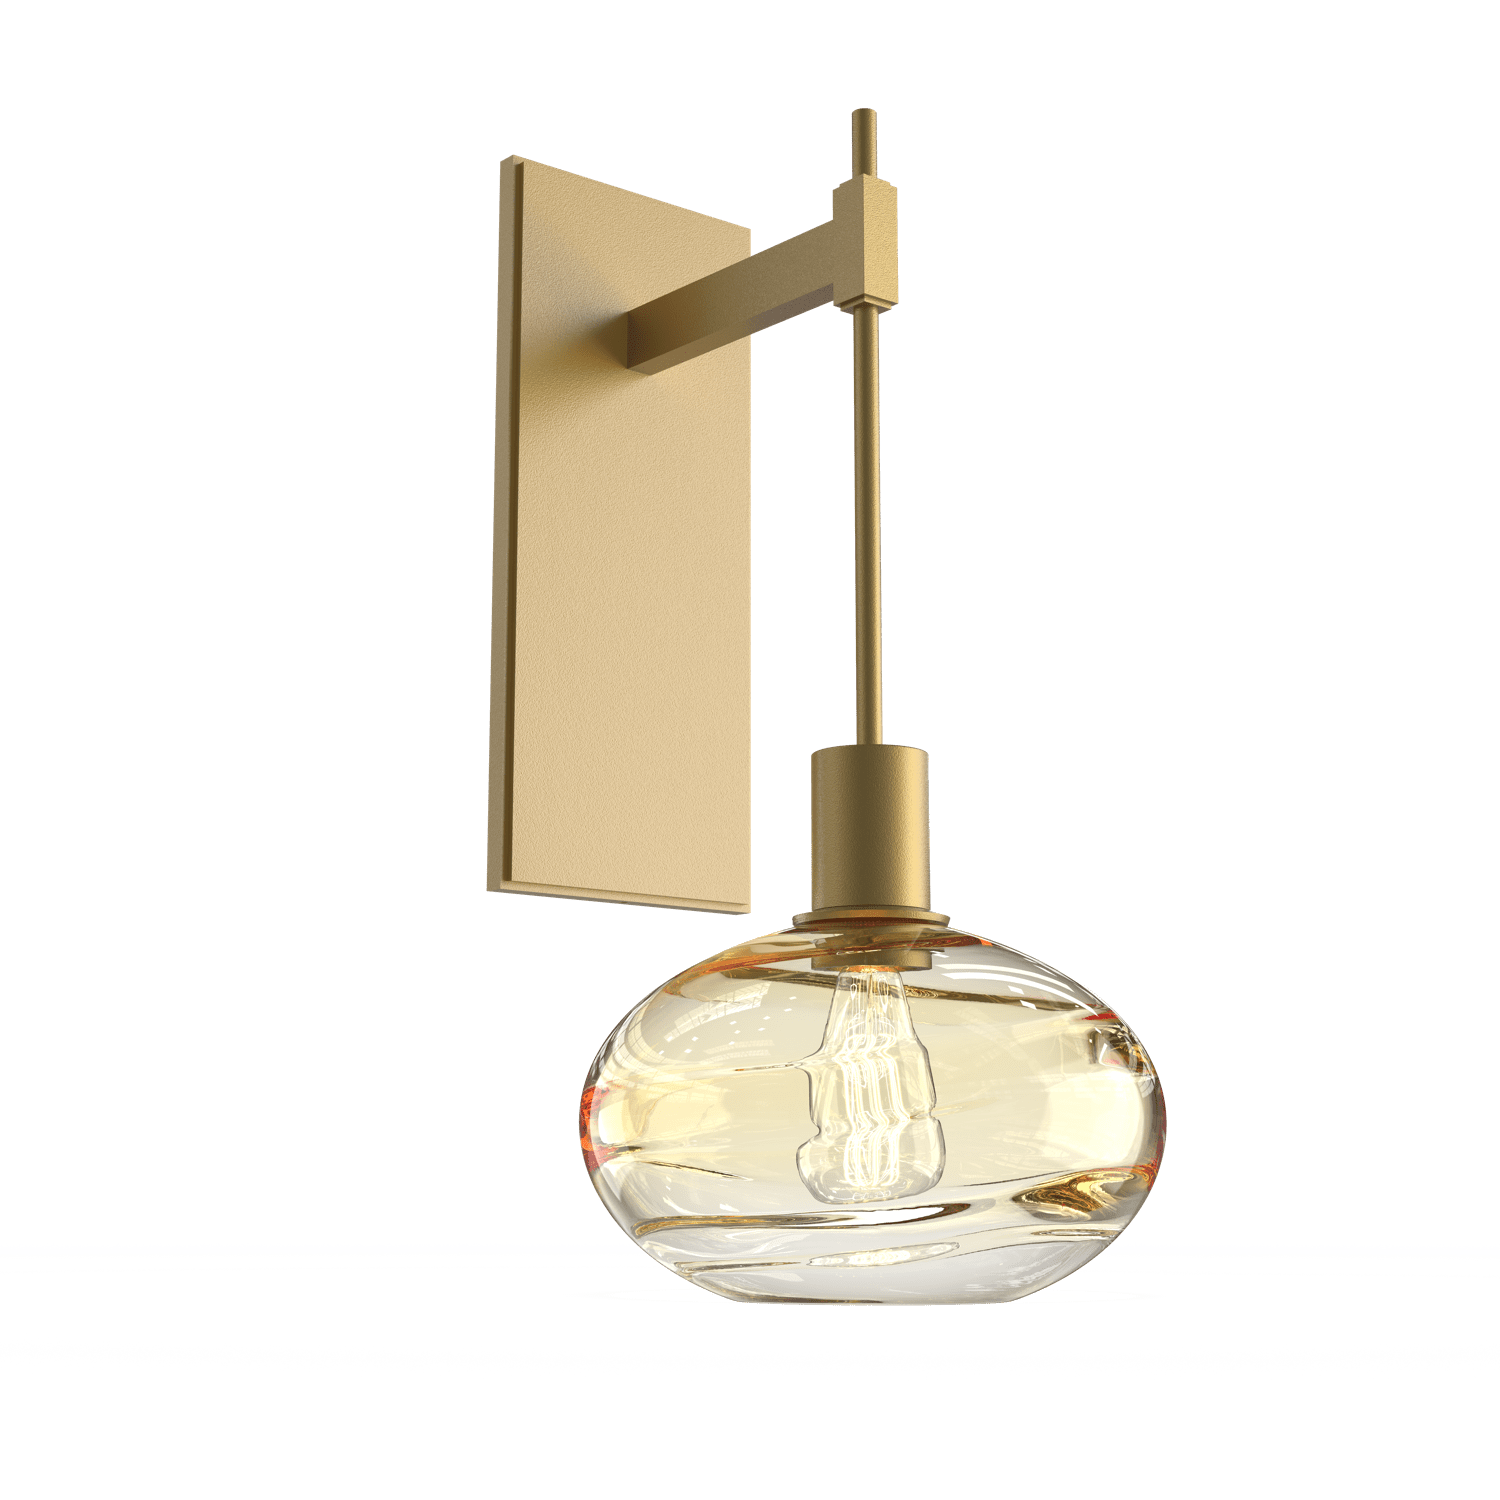 IDB0036-18-GB-OA-Hammerton-Studio-Optic-Blown-Glass-Coppa-tempo-wall-sconce-with-gilded-brass-finish-and-optic-amber-blown-glass-shades-and-incandescent-lamping